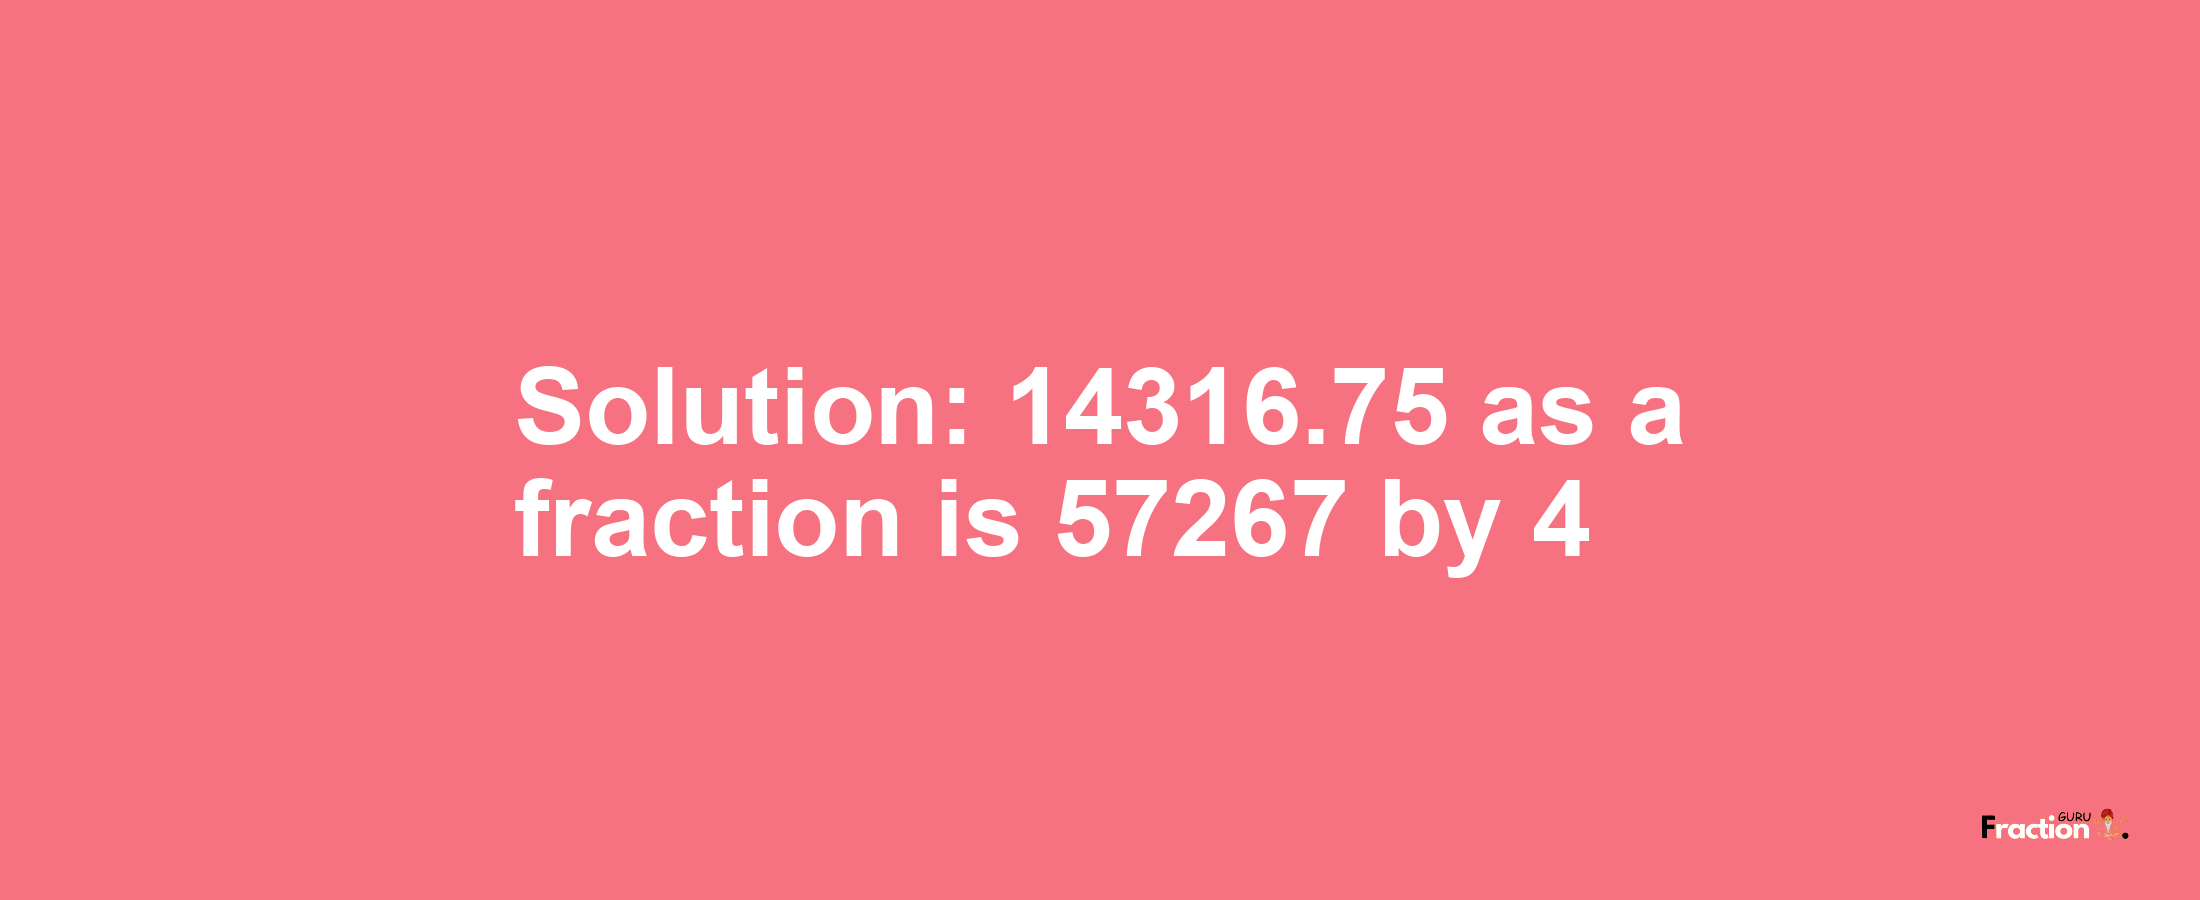 Solution:14316.75 as a fraction is 57267/4